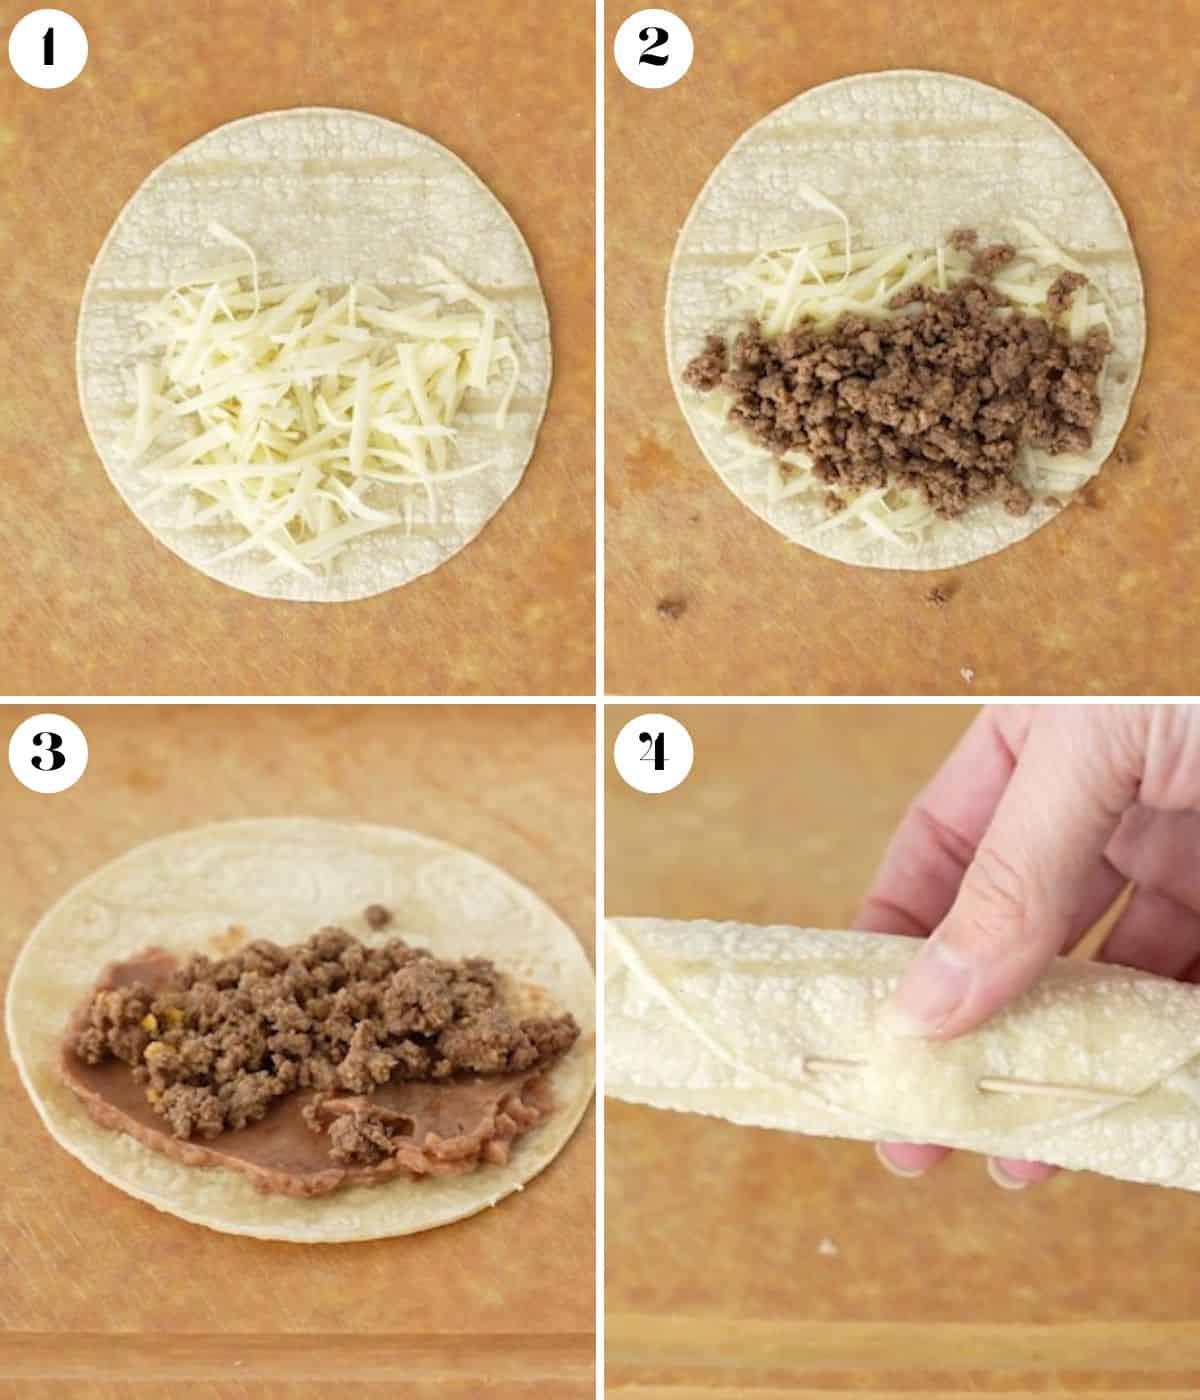 4 Images in a collage on how to roll a taquito.